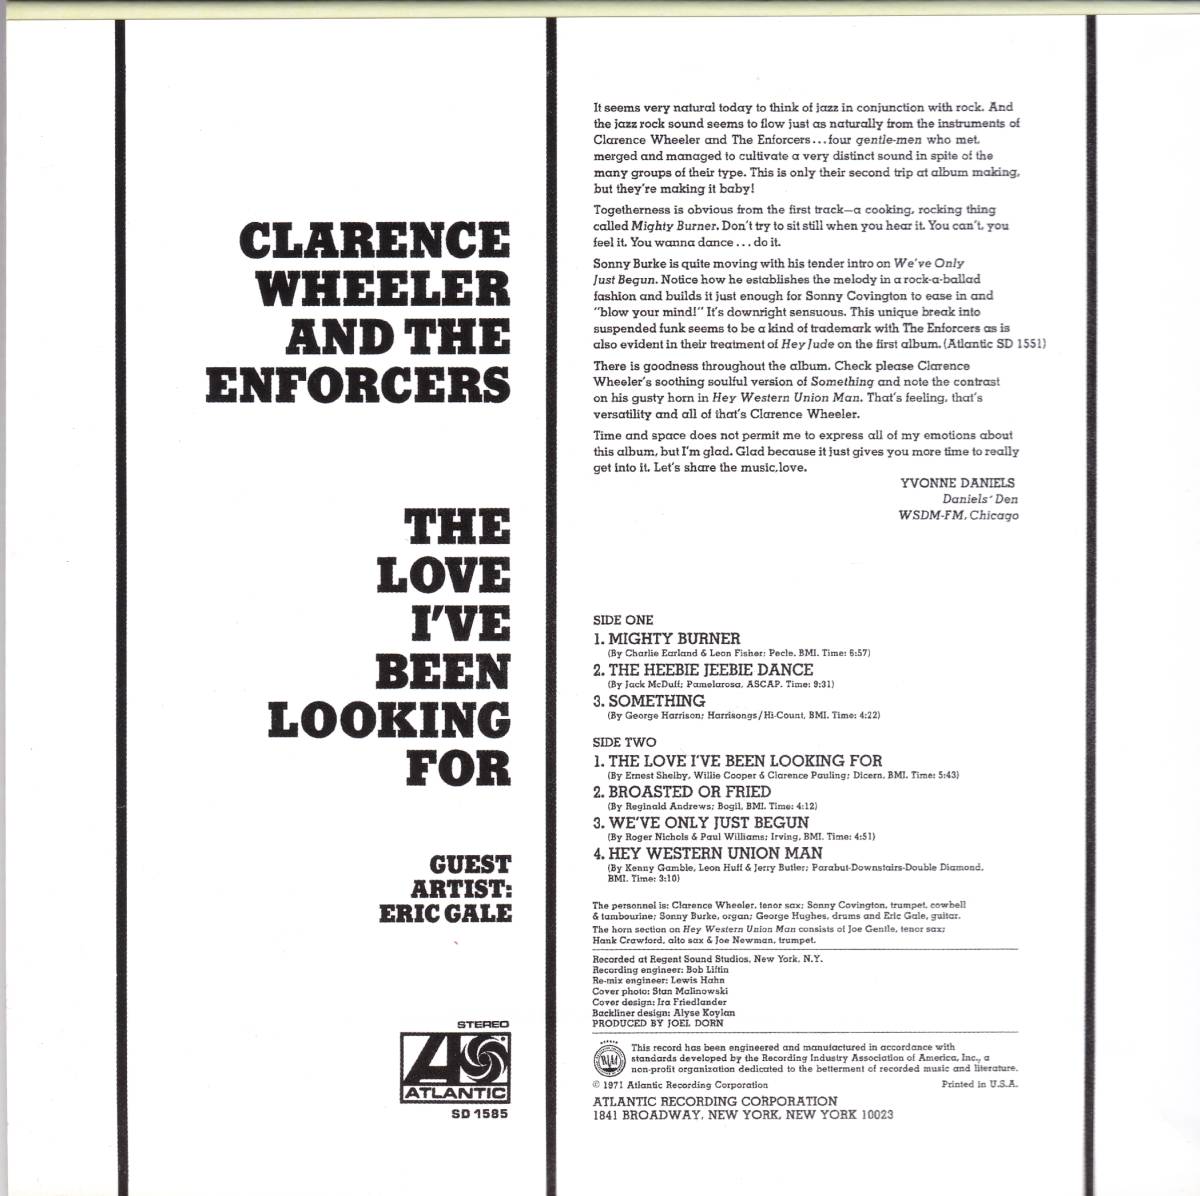 ☆CLARENCE WHEELER AND THE ENFORCERS/The Love I’ve Been Looking For◆71年発表のEric Gale参加の大名盤◇初CD化の激レア限定紙ジャケ_画像2